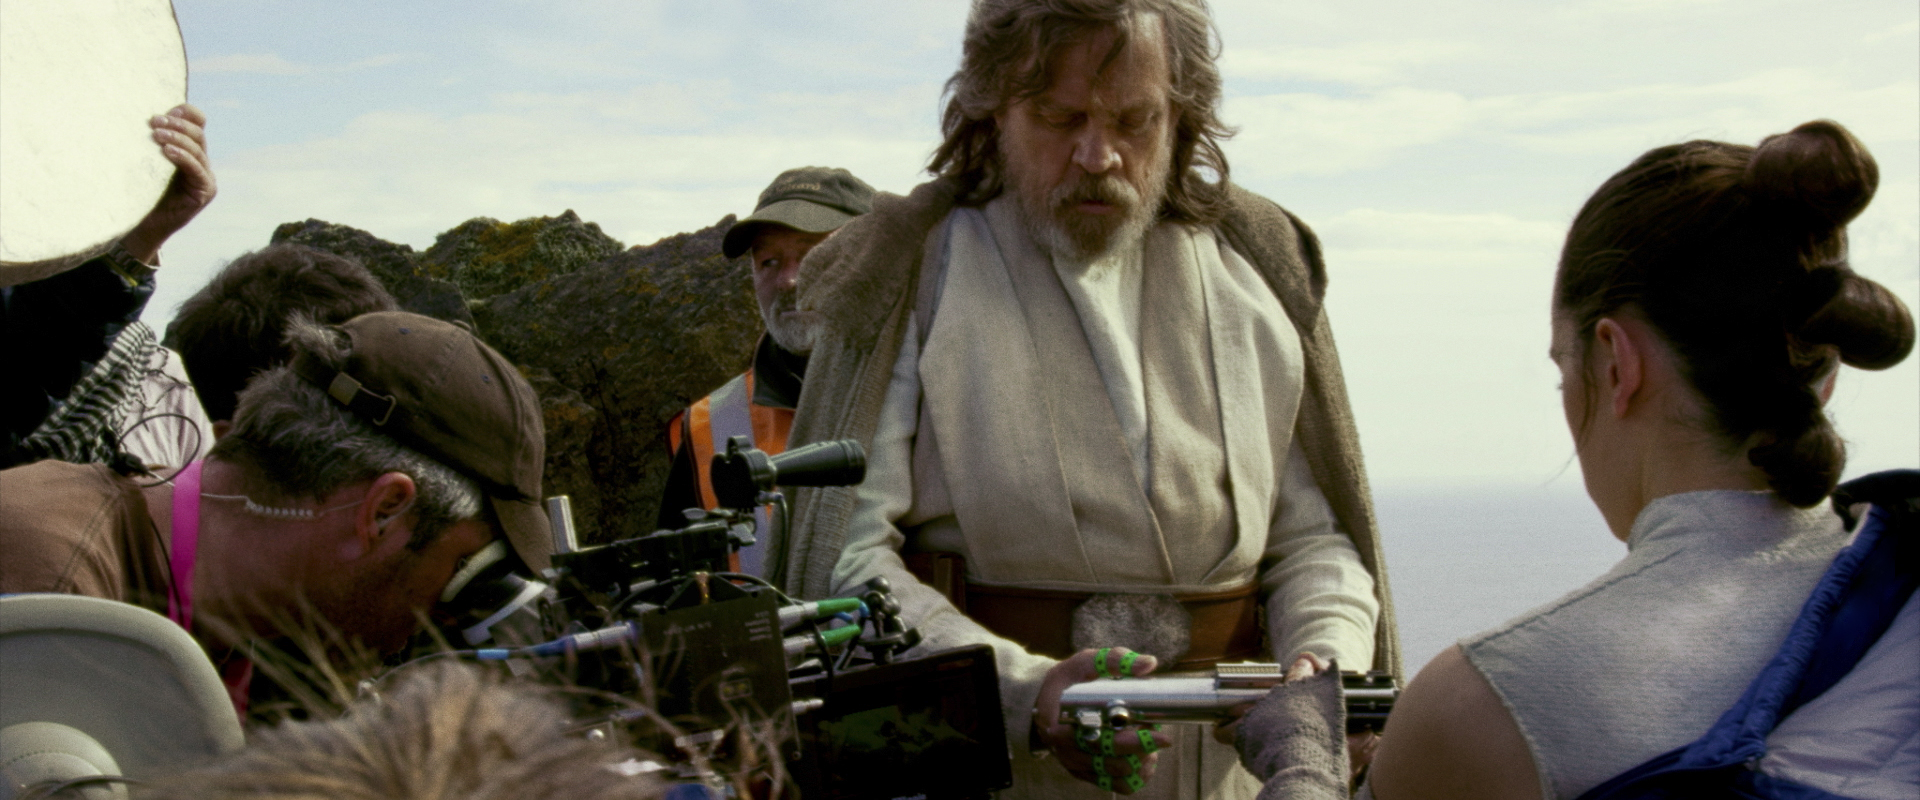 The legend of Luke Skywalker and how Star Wars: The Last Jedi is surprisingly metafictional and self-examining